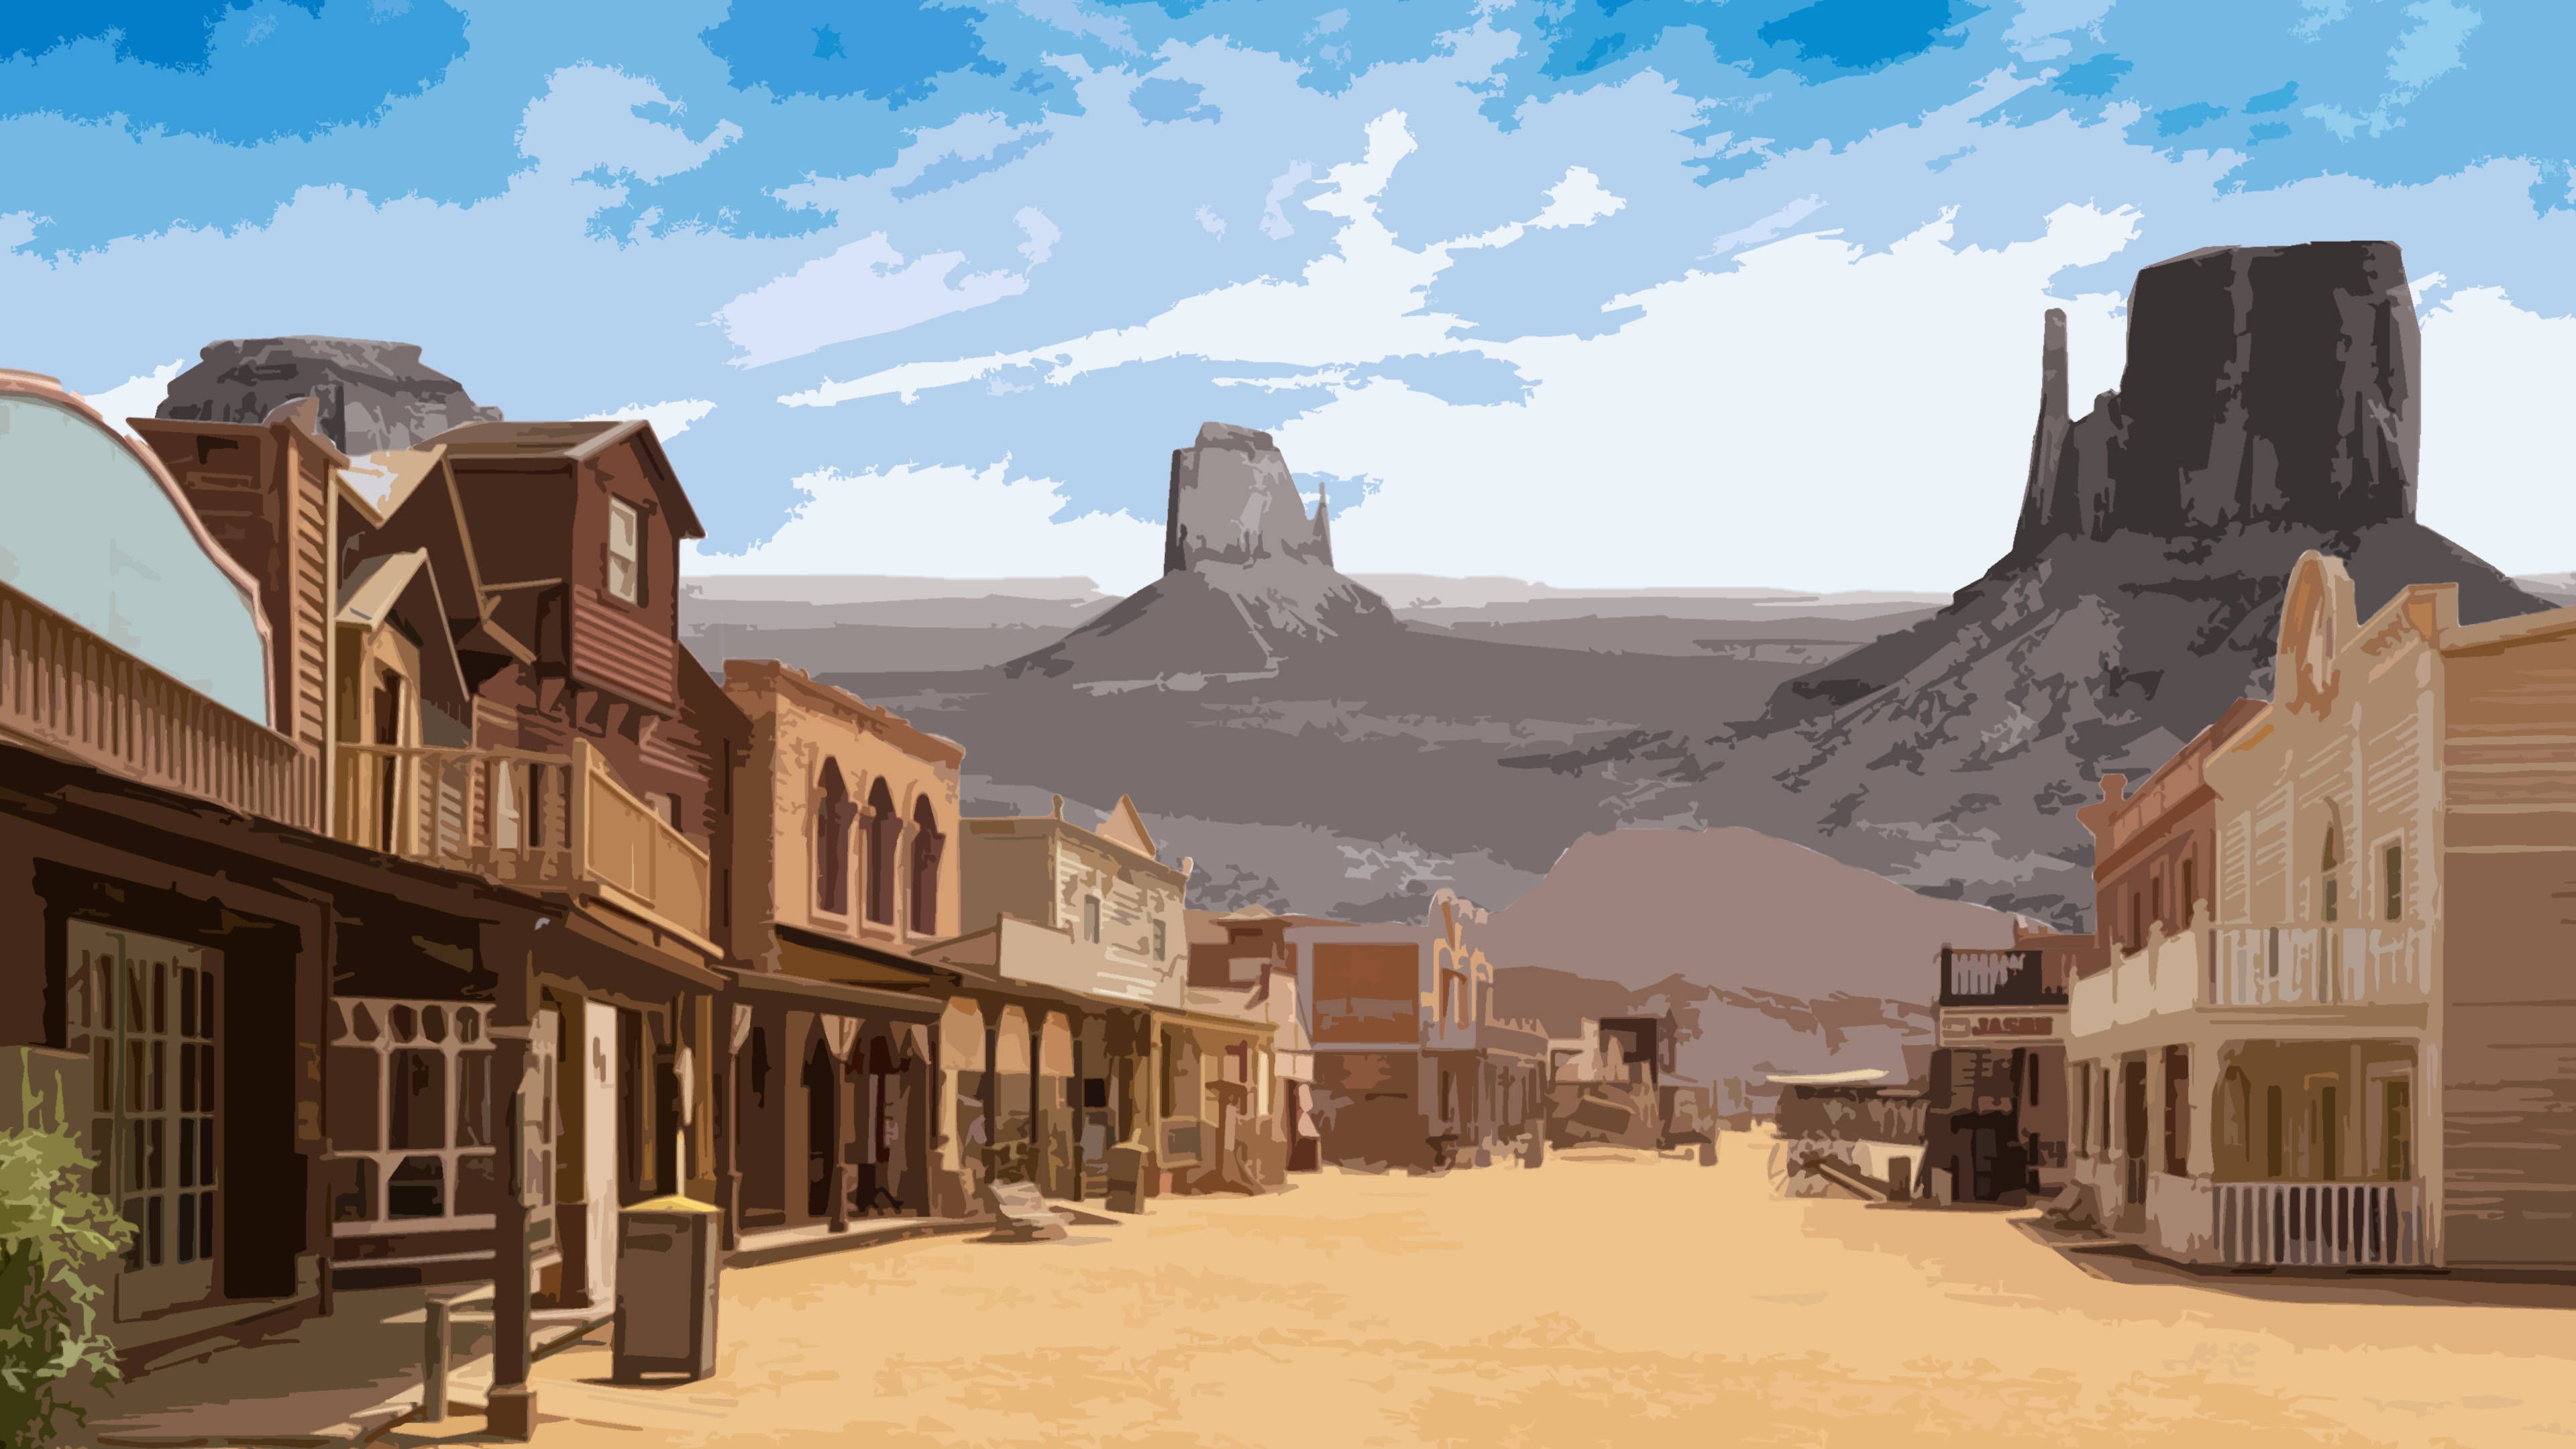 A painting of an old west town - Texas, western, desert, cowgirl